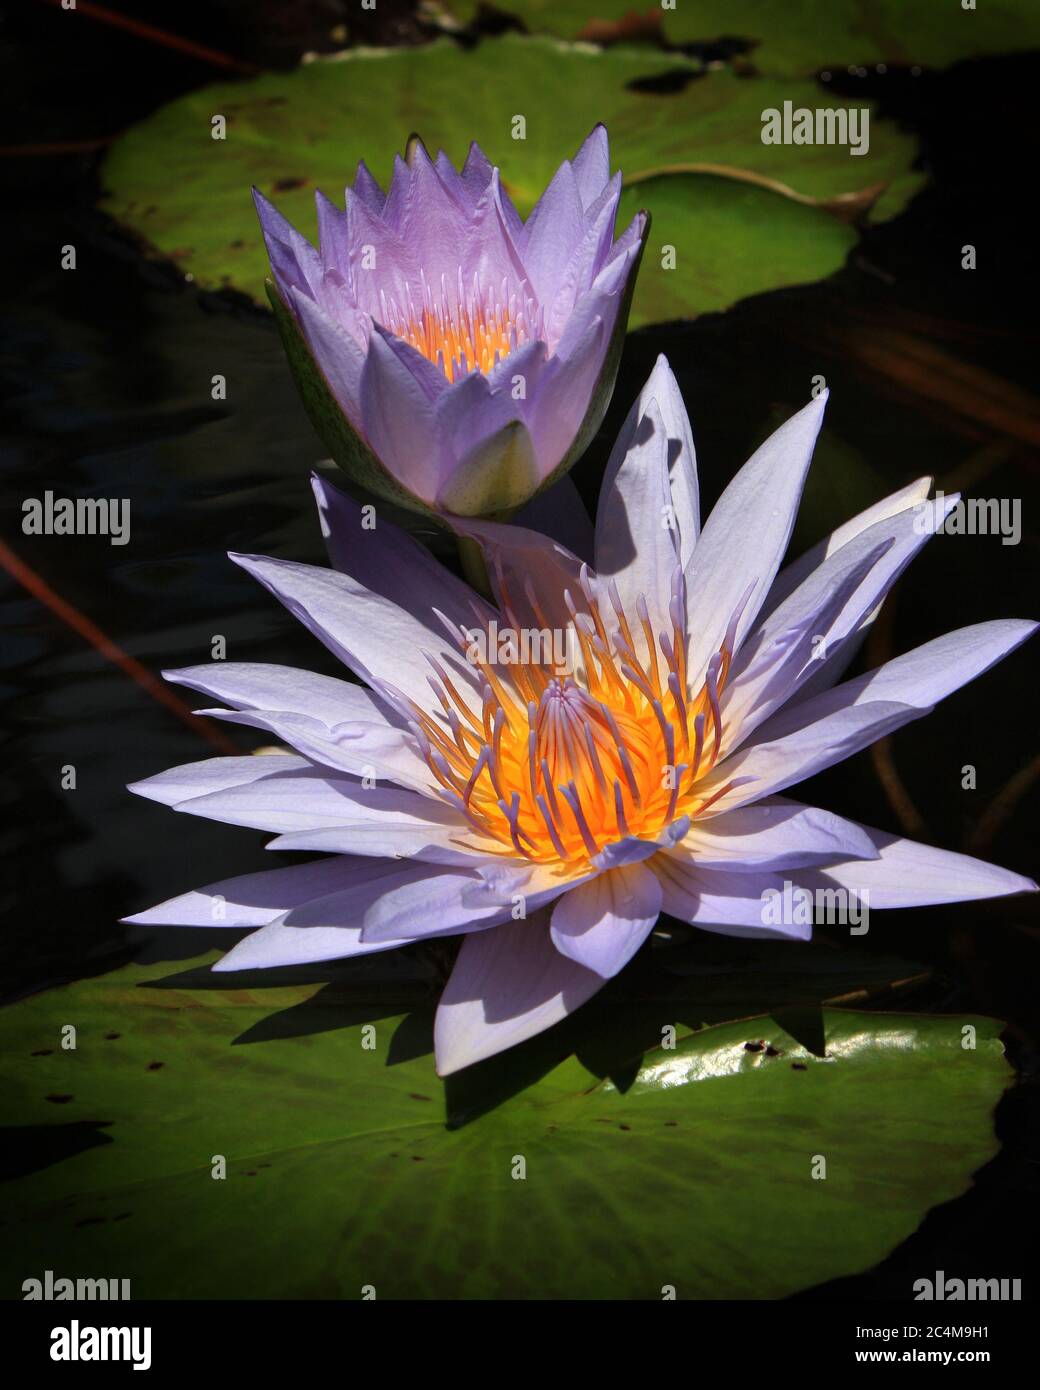 A pair of water lilies in different stages of bloom. Stock Photo